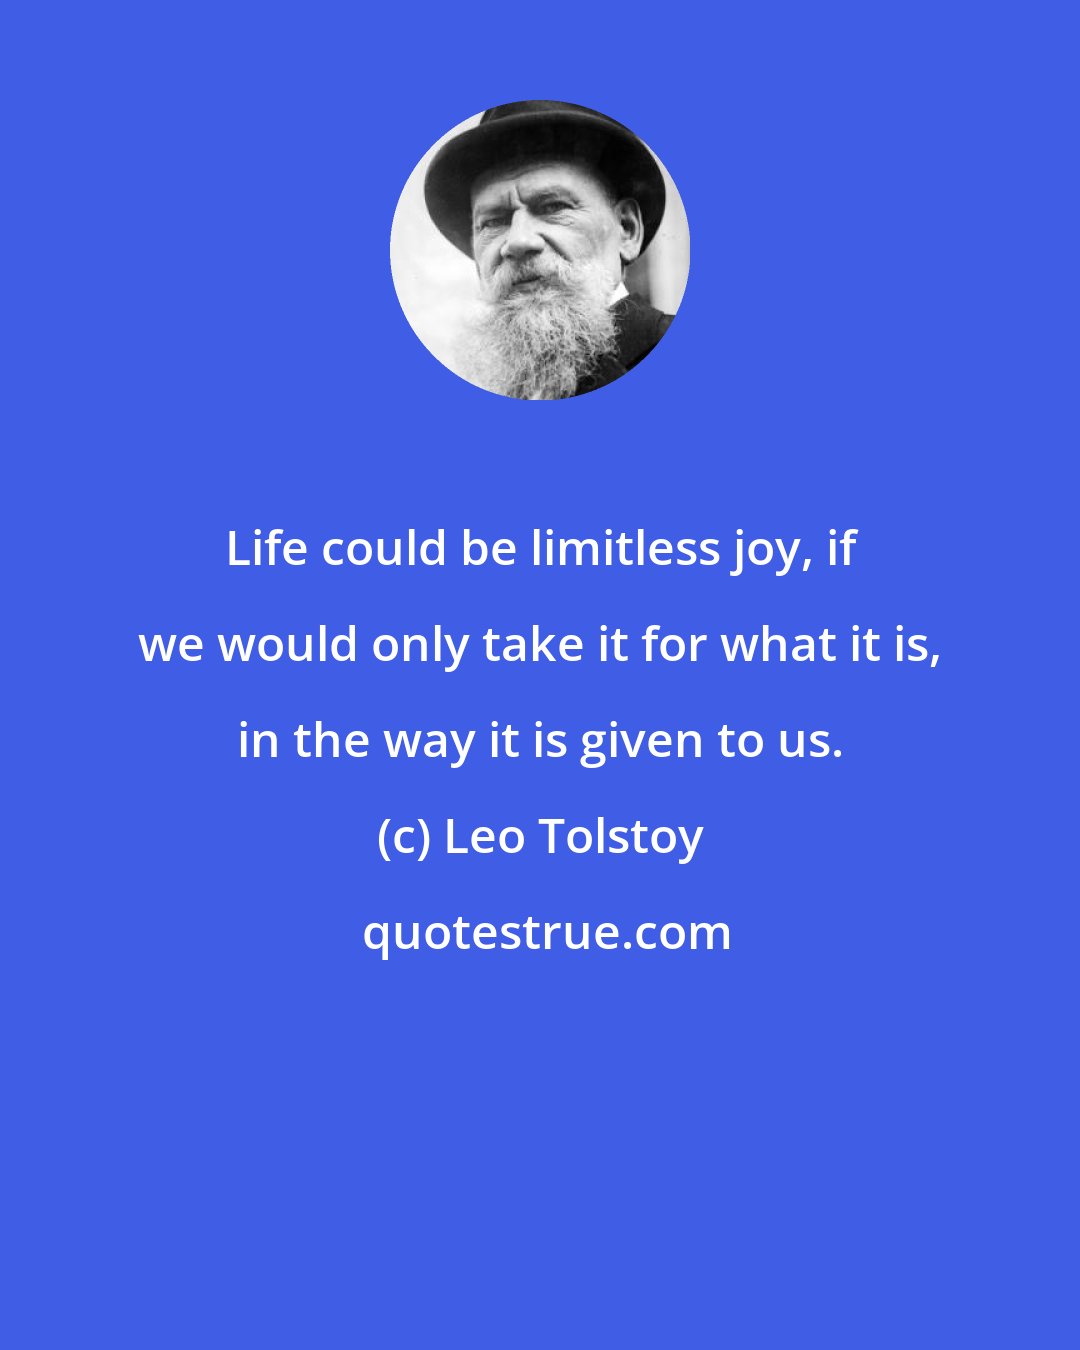 Leo Tolstoy: Life could be limitless joy, if we would only take it for what it is, in the way it is given to us.